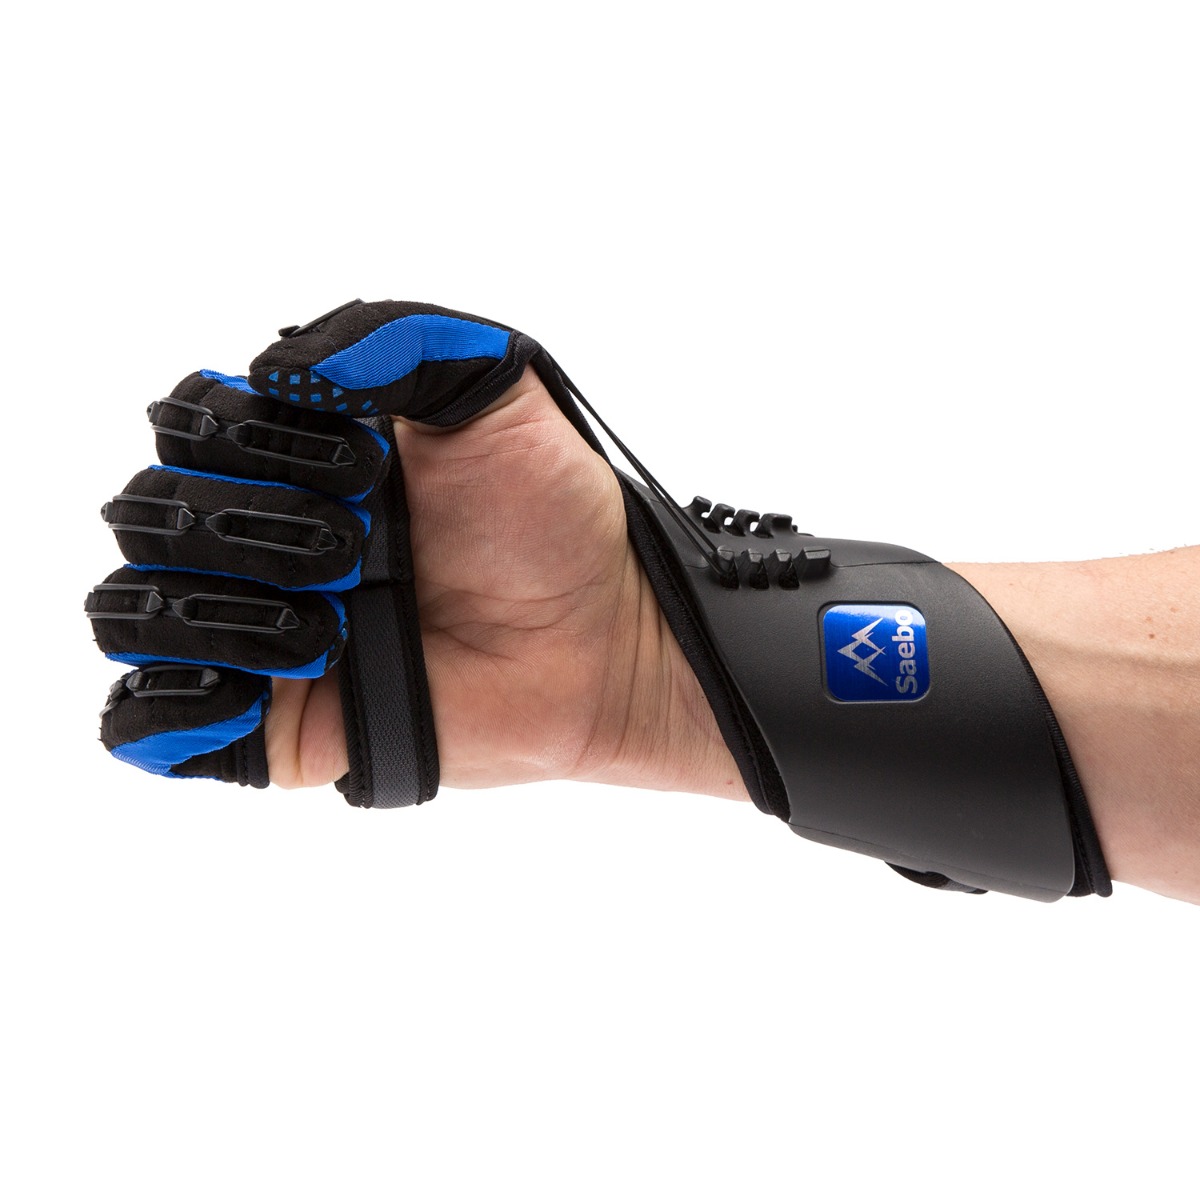 SaeboGlove, open hand, top view